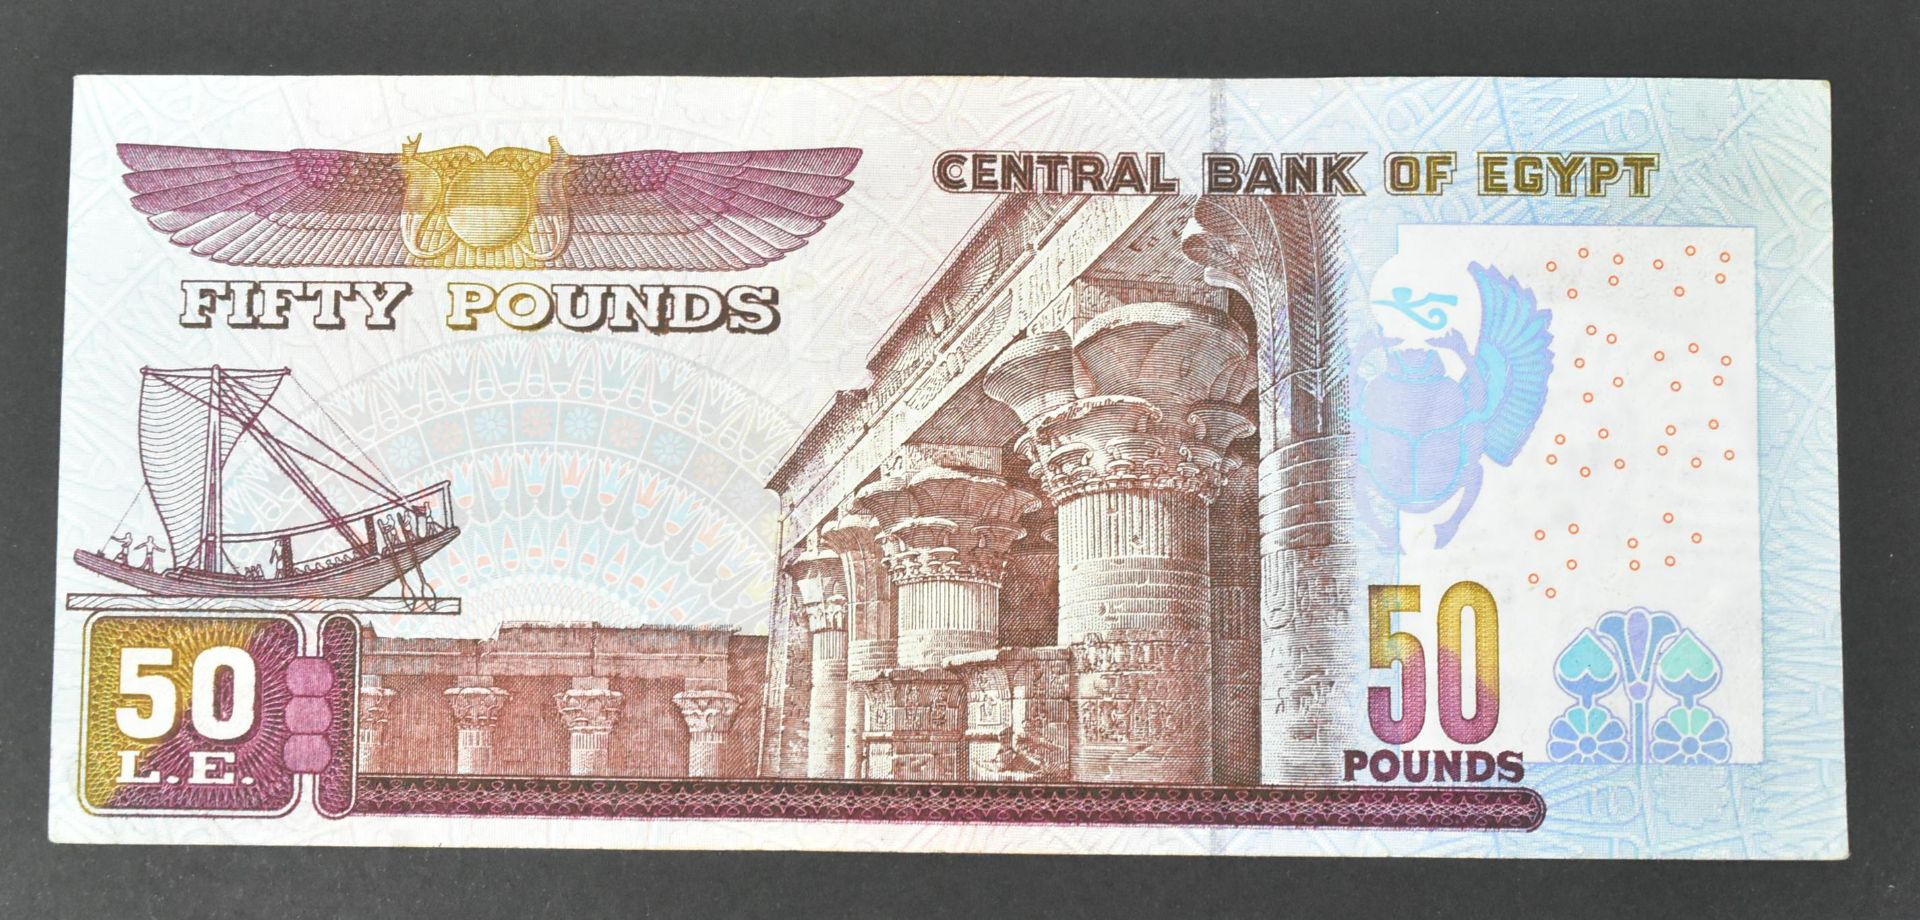 INTERNATIONAL UNCIRCULATED BANK NOTES - AFRICA - Image 24 of 28